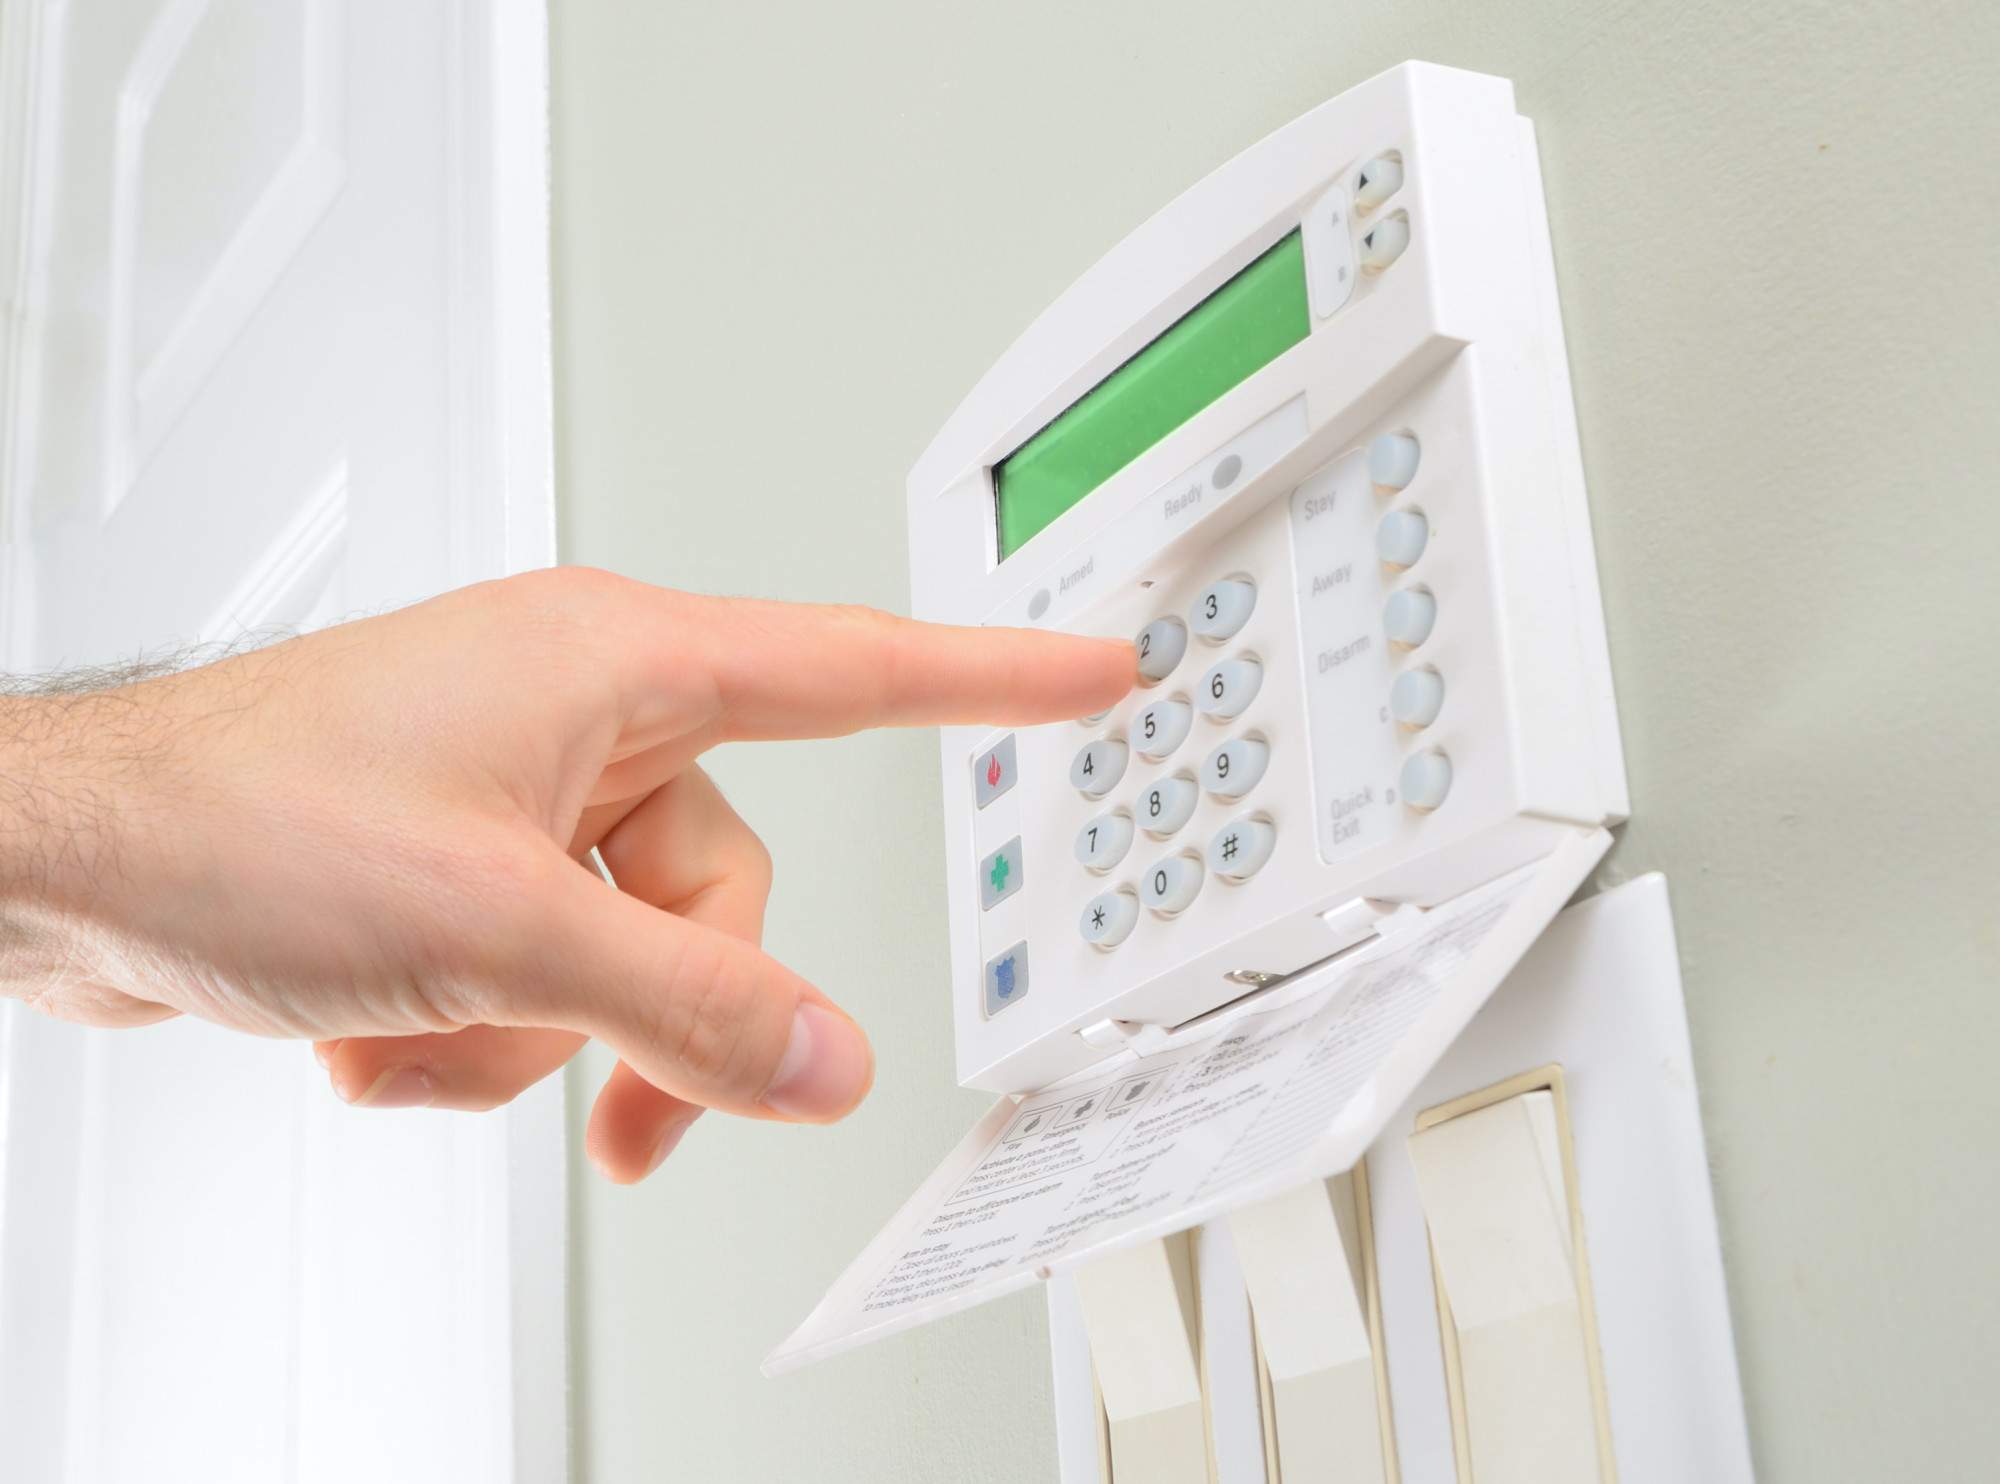 How Much Does a Home Security System Cost on Average?